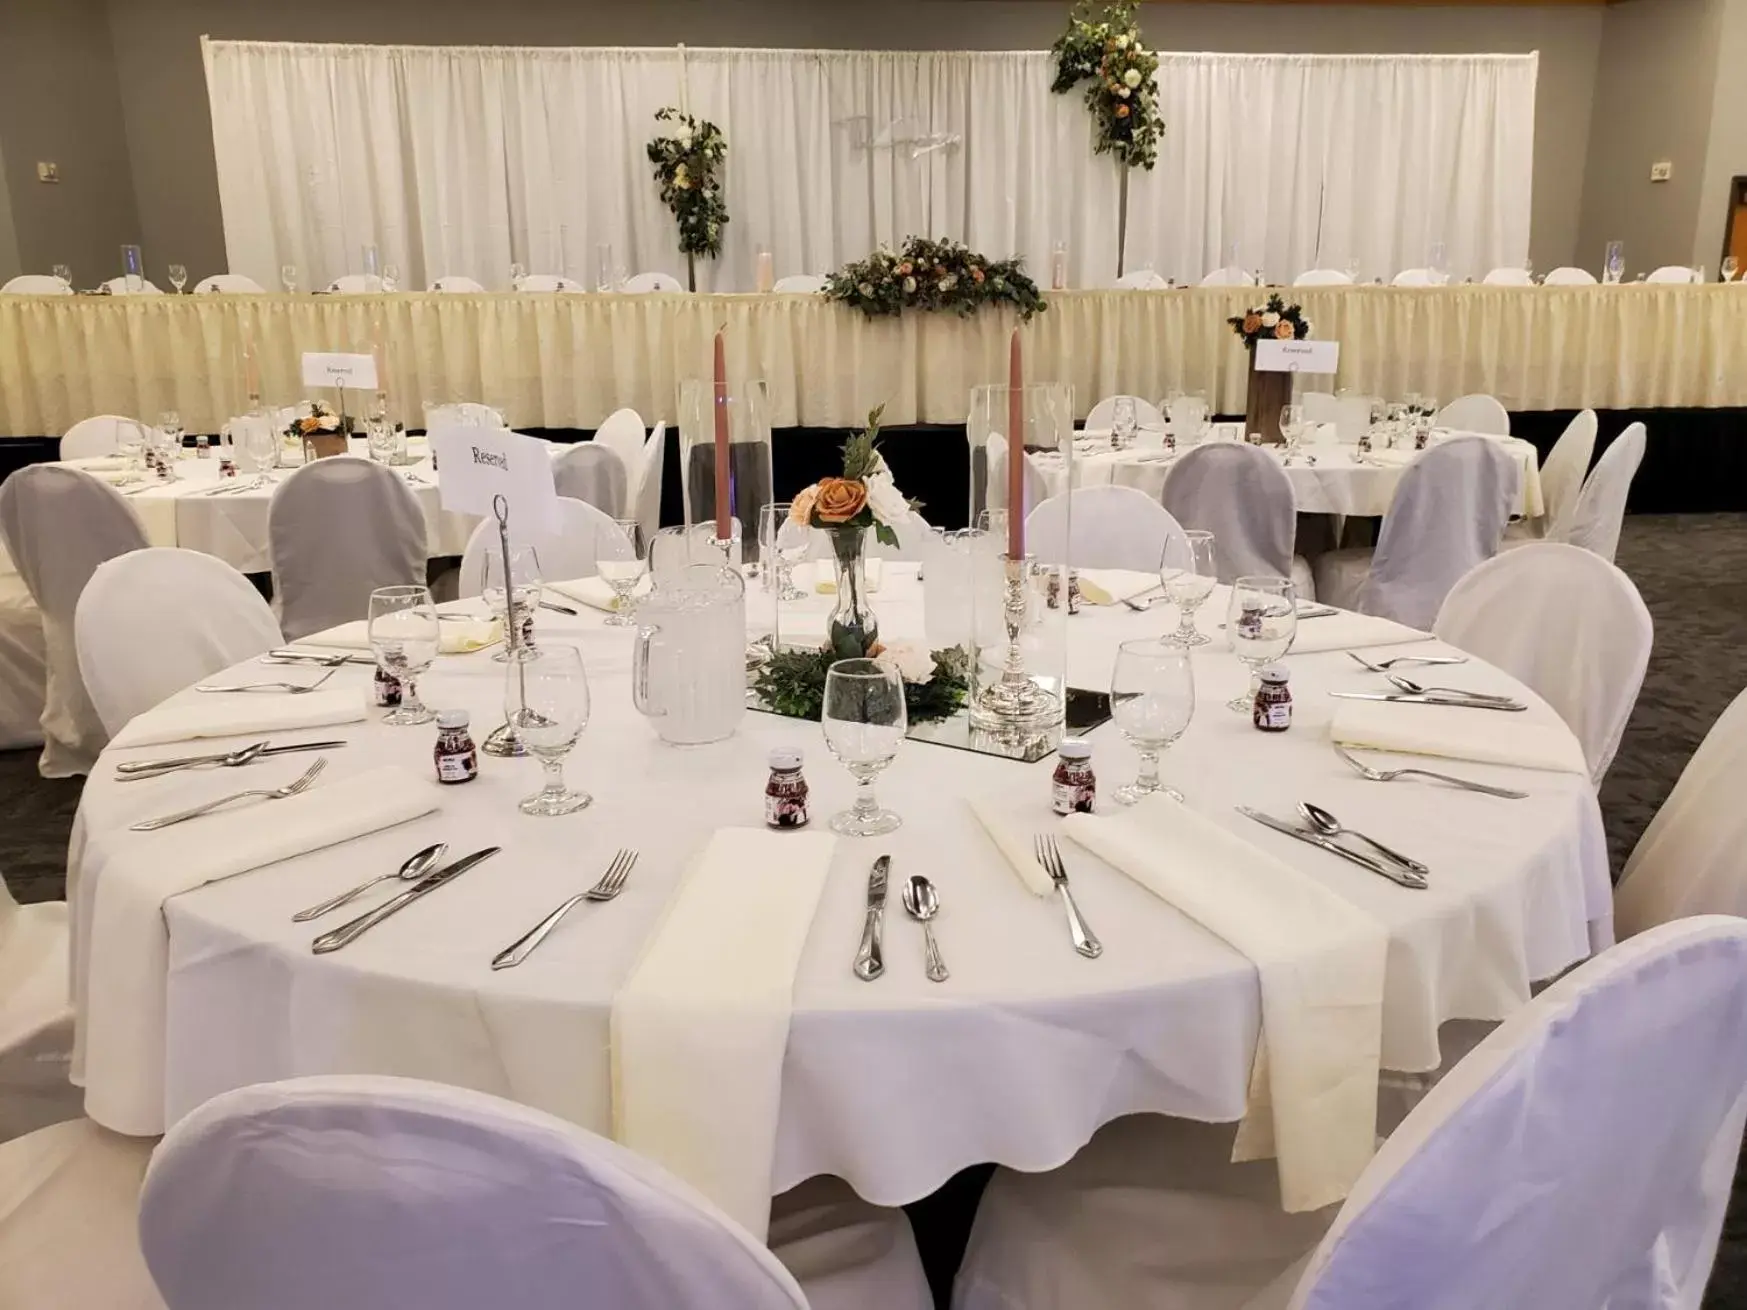 Banquet/Function facilities, Banquet Facilities in Crossroads Hotel and Huron Event Center